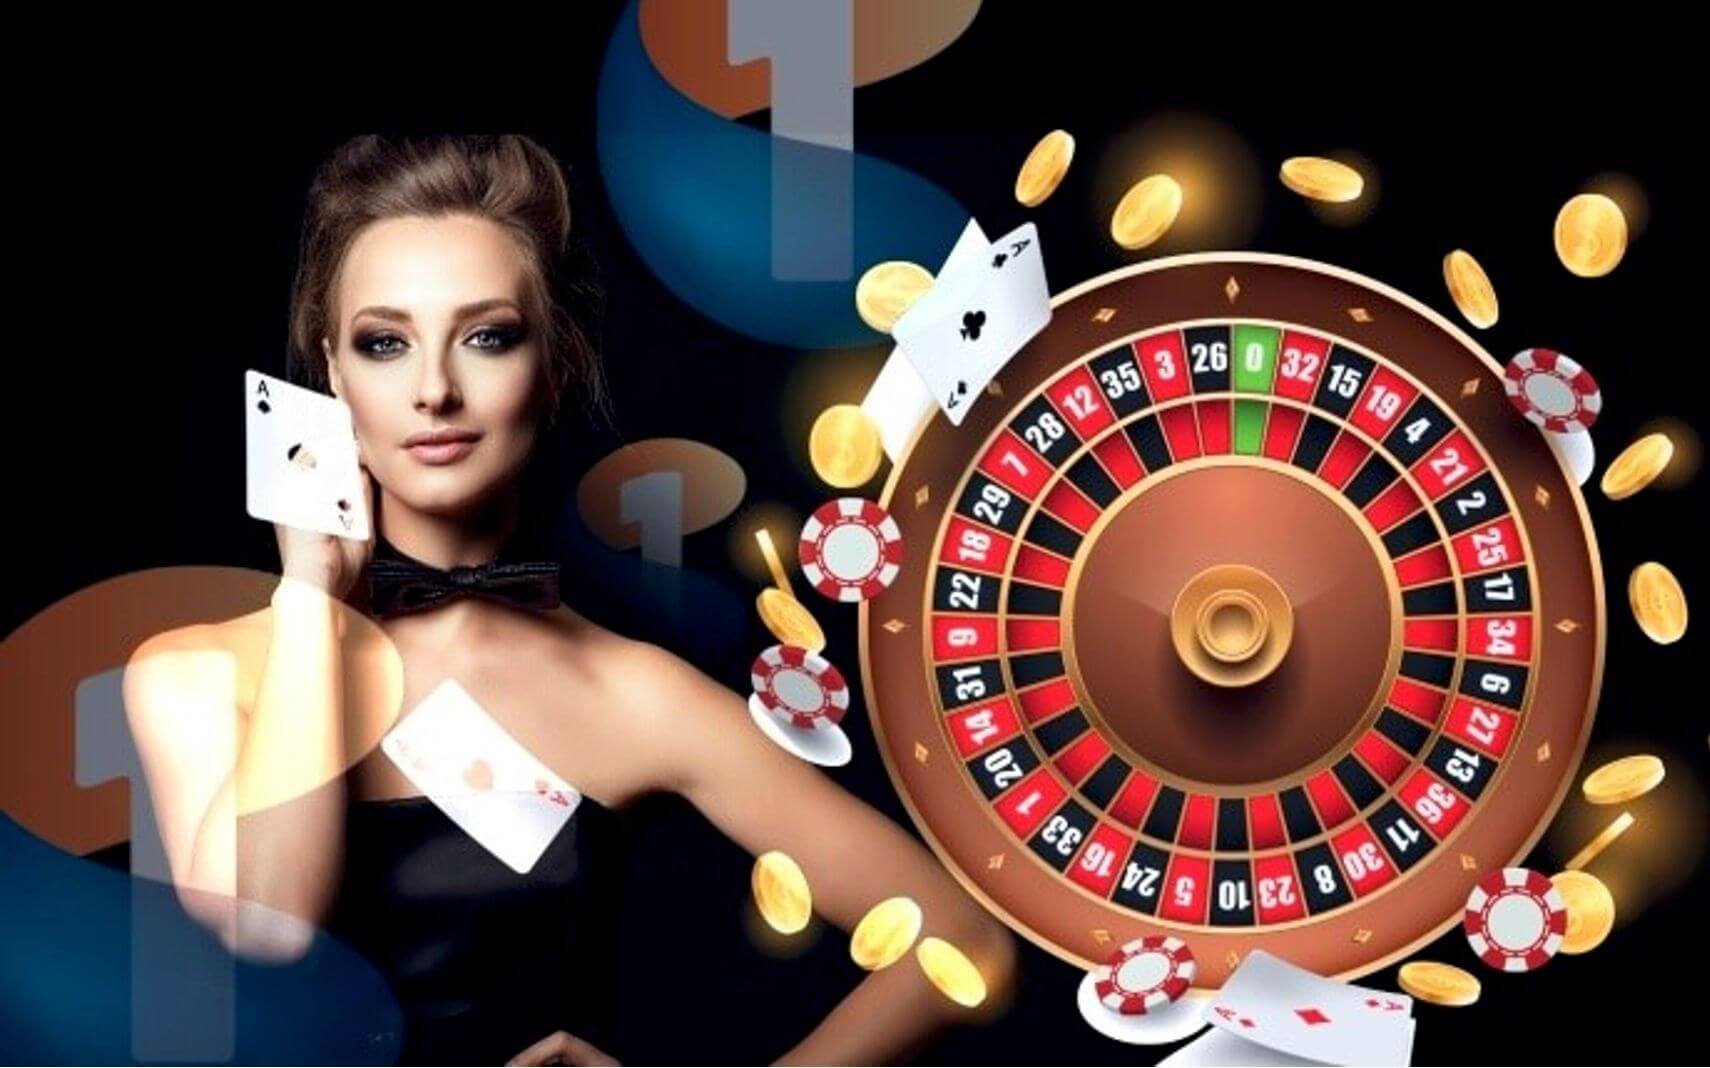 Playing Live Casino Games Can Make You Forget About Your Work